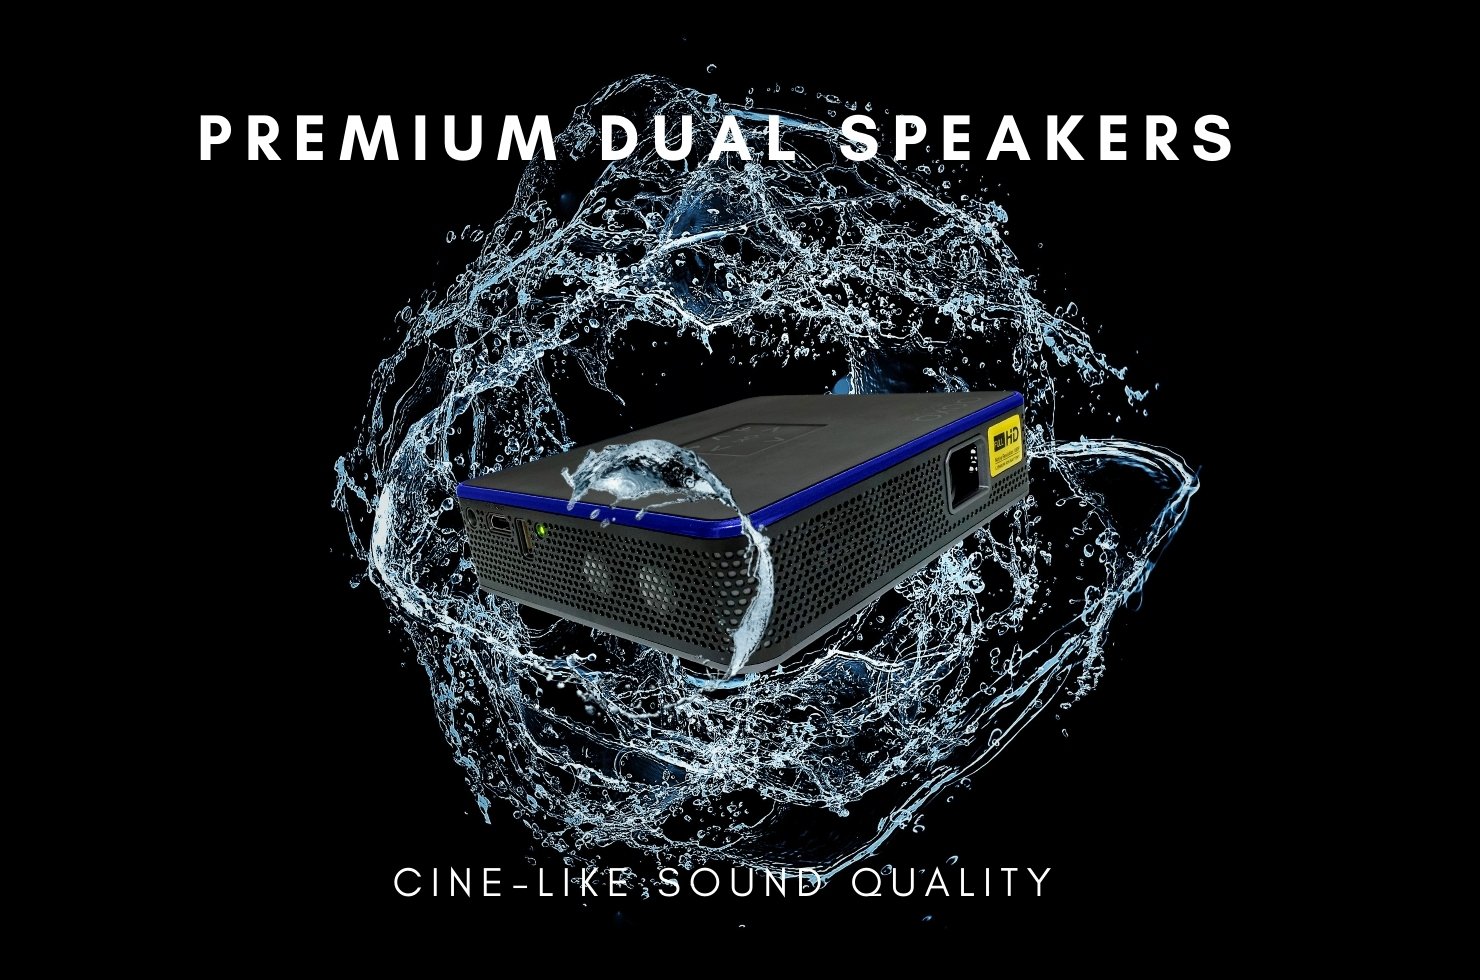 Premium Dual Speakers - M7 surround by water that is exploding out due to the speakers